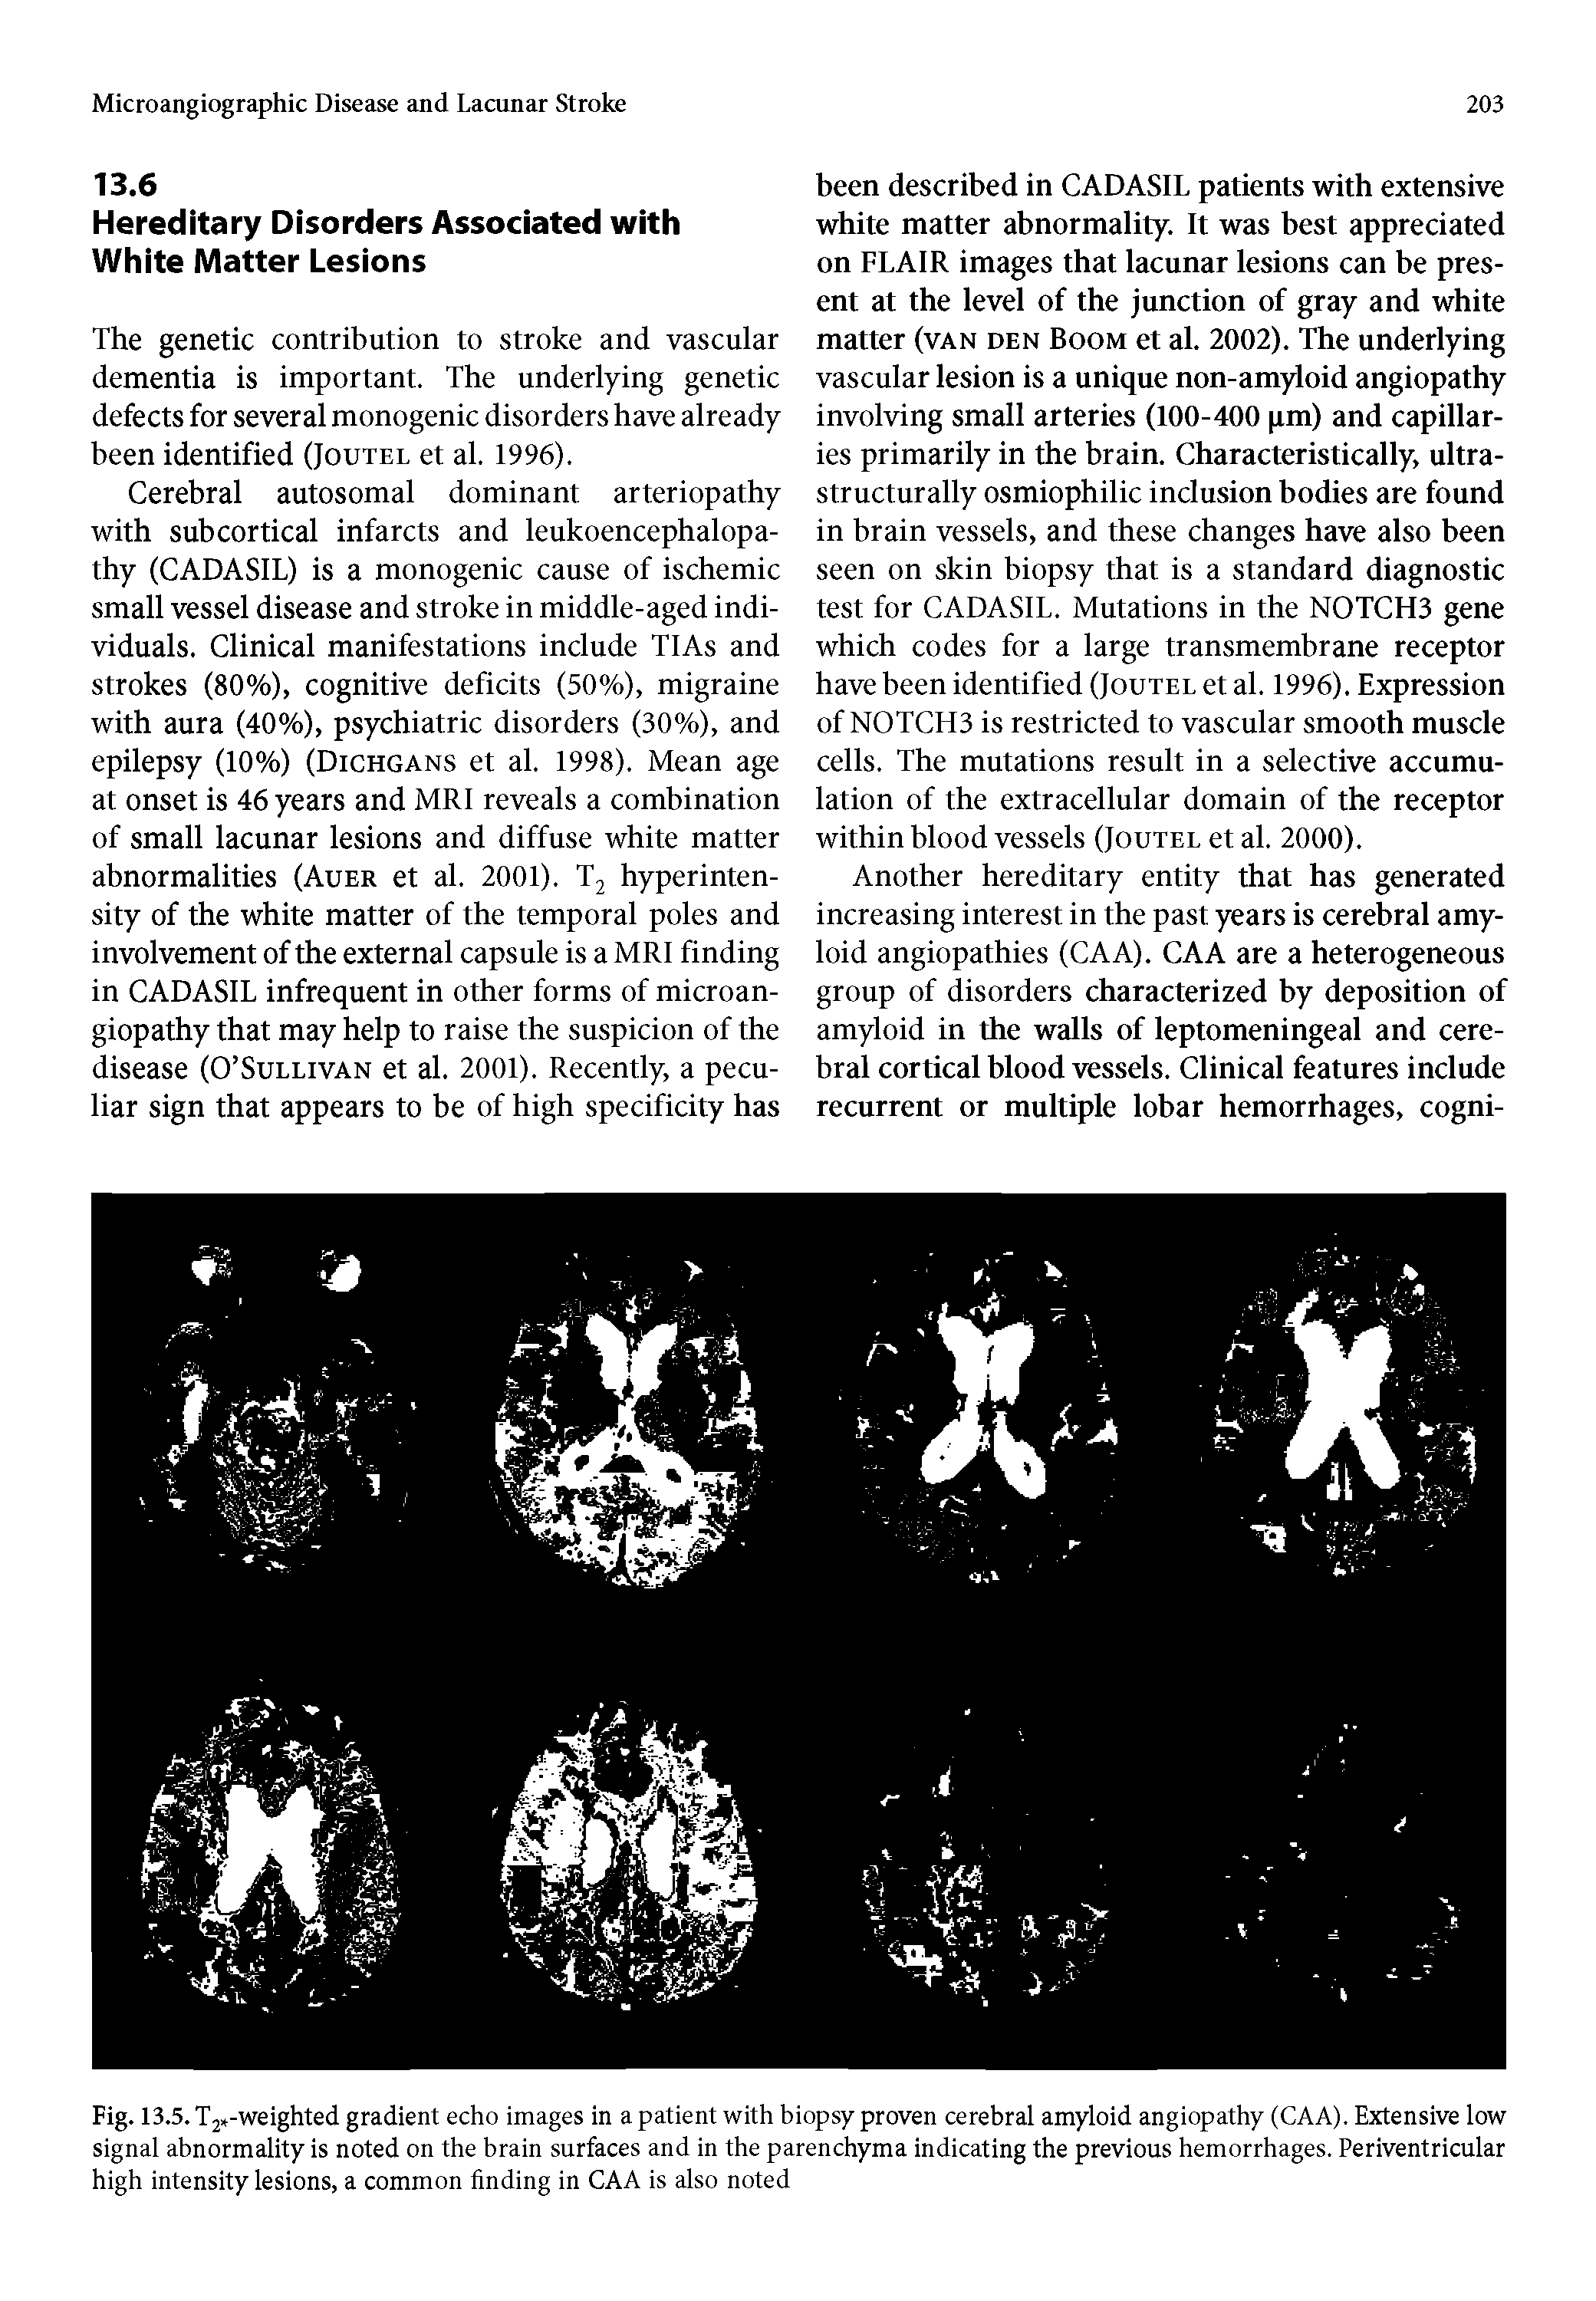 Fig. 13.5. T2 -weighted gradient echo images in a patient with biopsy proven cerebral amyloid angiopathy (CAA). Extensive low signal abnormality is noted on the brain surfaces and in the parenchyma indicating the previous hemorrhages. Periventricular high intensity lesions, a common finding in CAA is also noted...